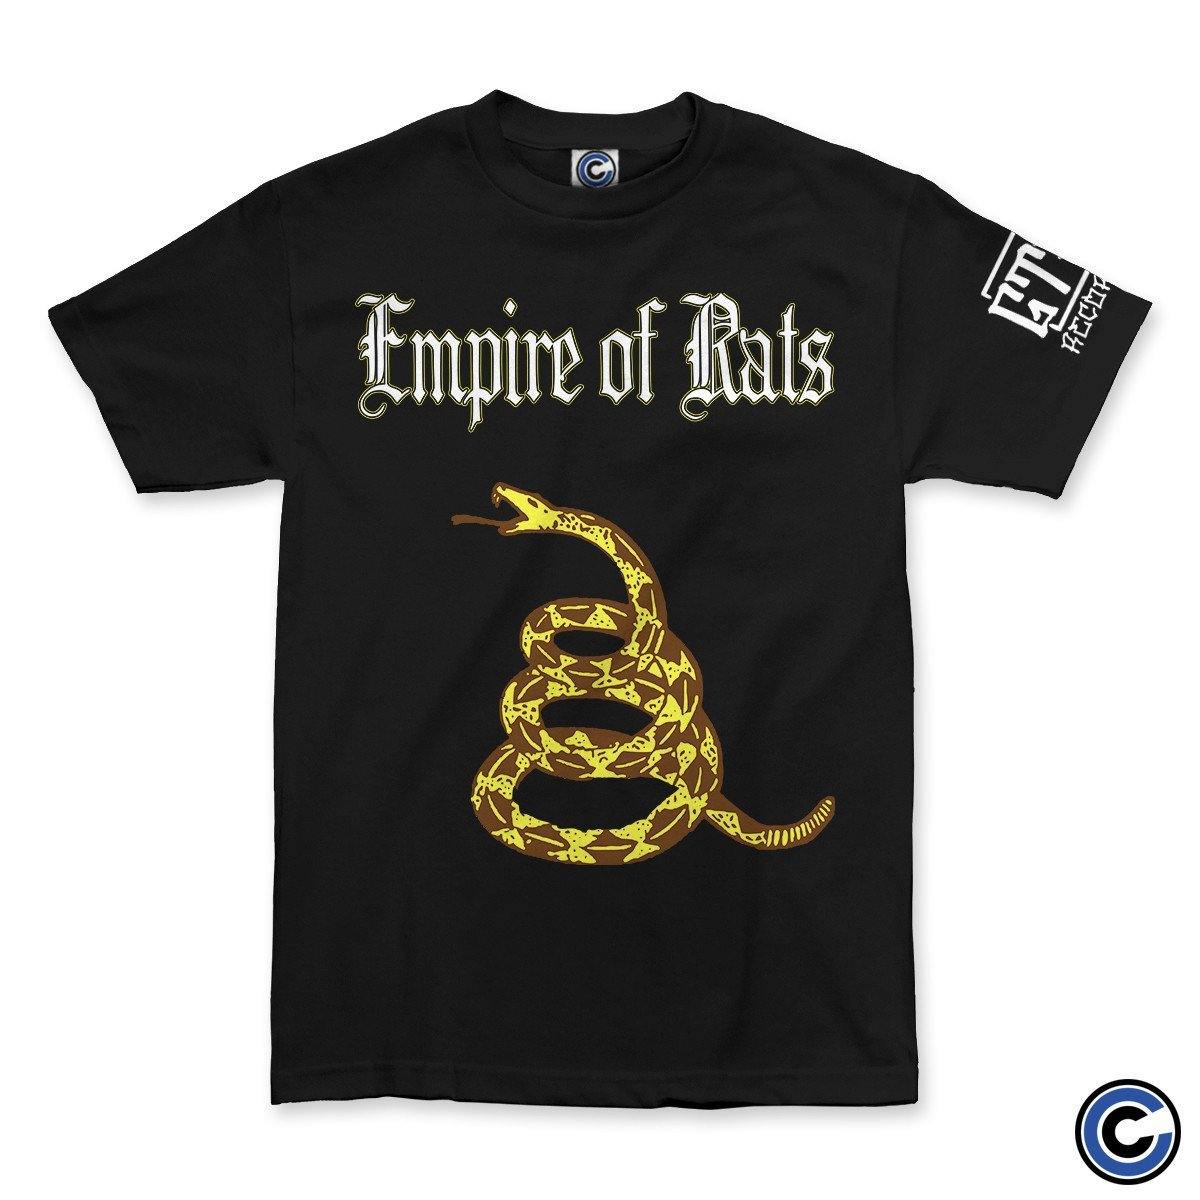 Buy – Empire of Rats "Colorful Snake" Shirt – Band & Music Merch – Cold Cuts Merch